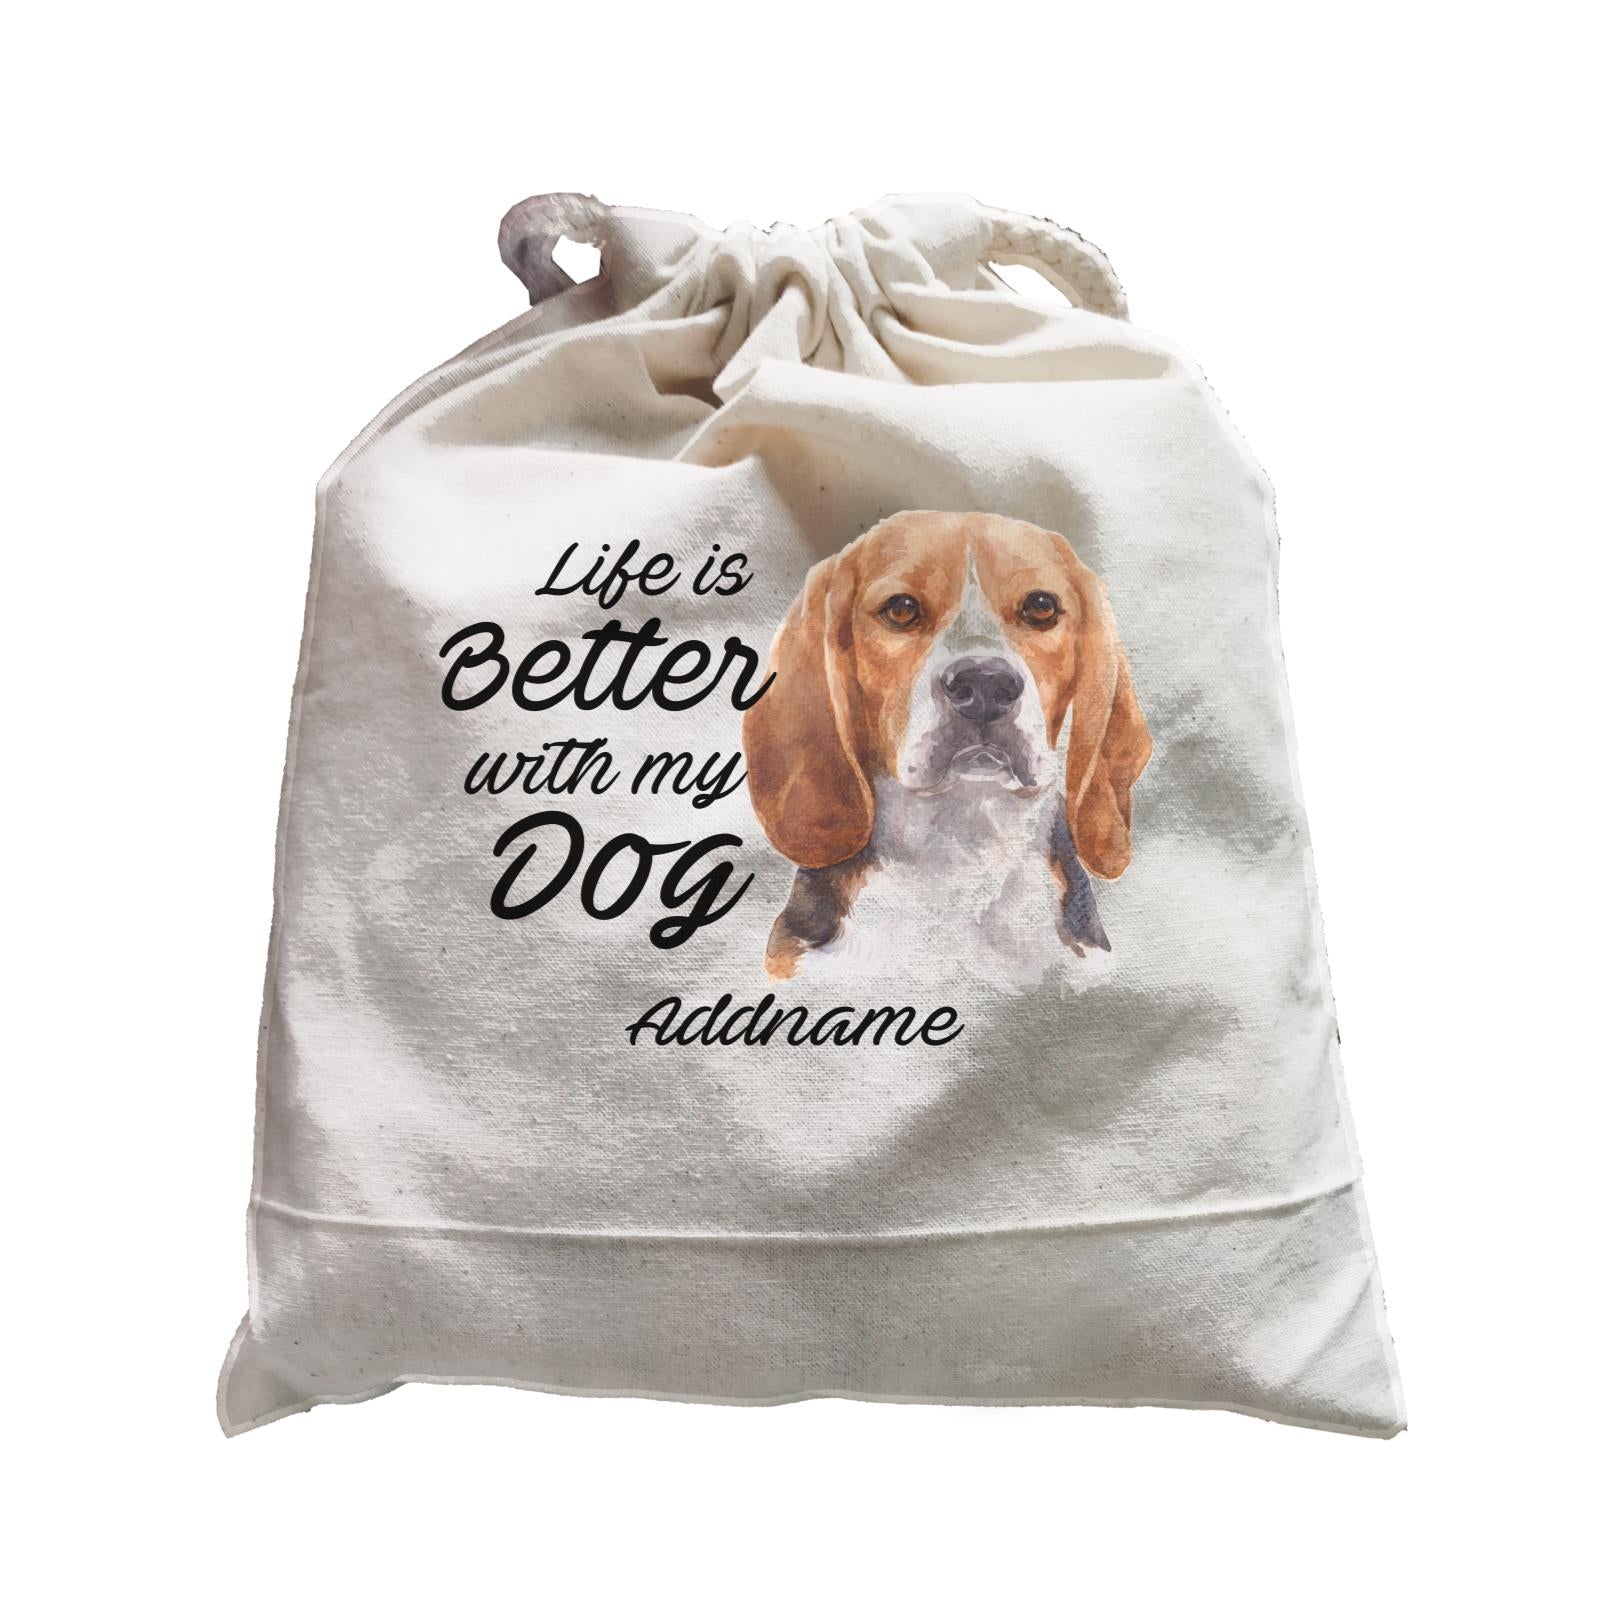 Watercolor Life is Better With My Dog Beagle Frown Addname Satchel